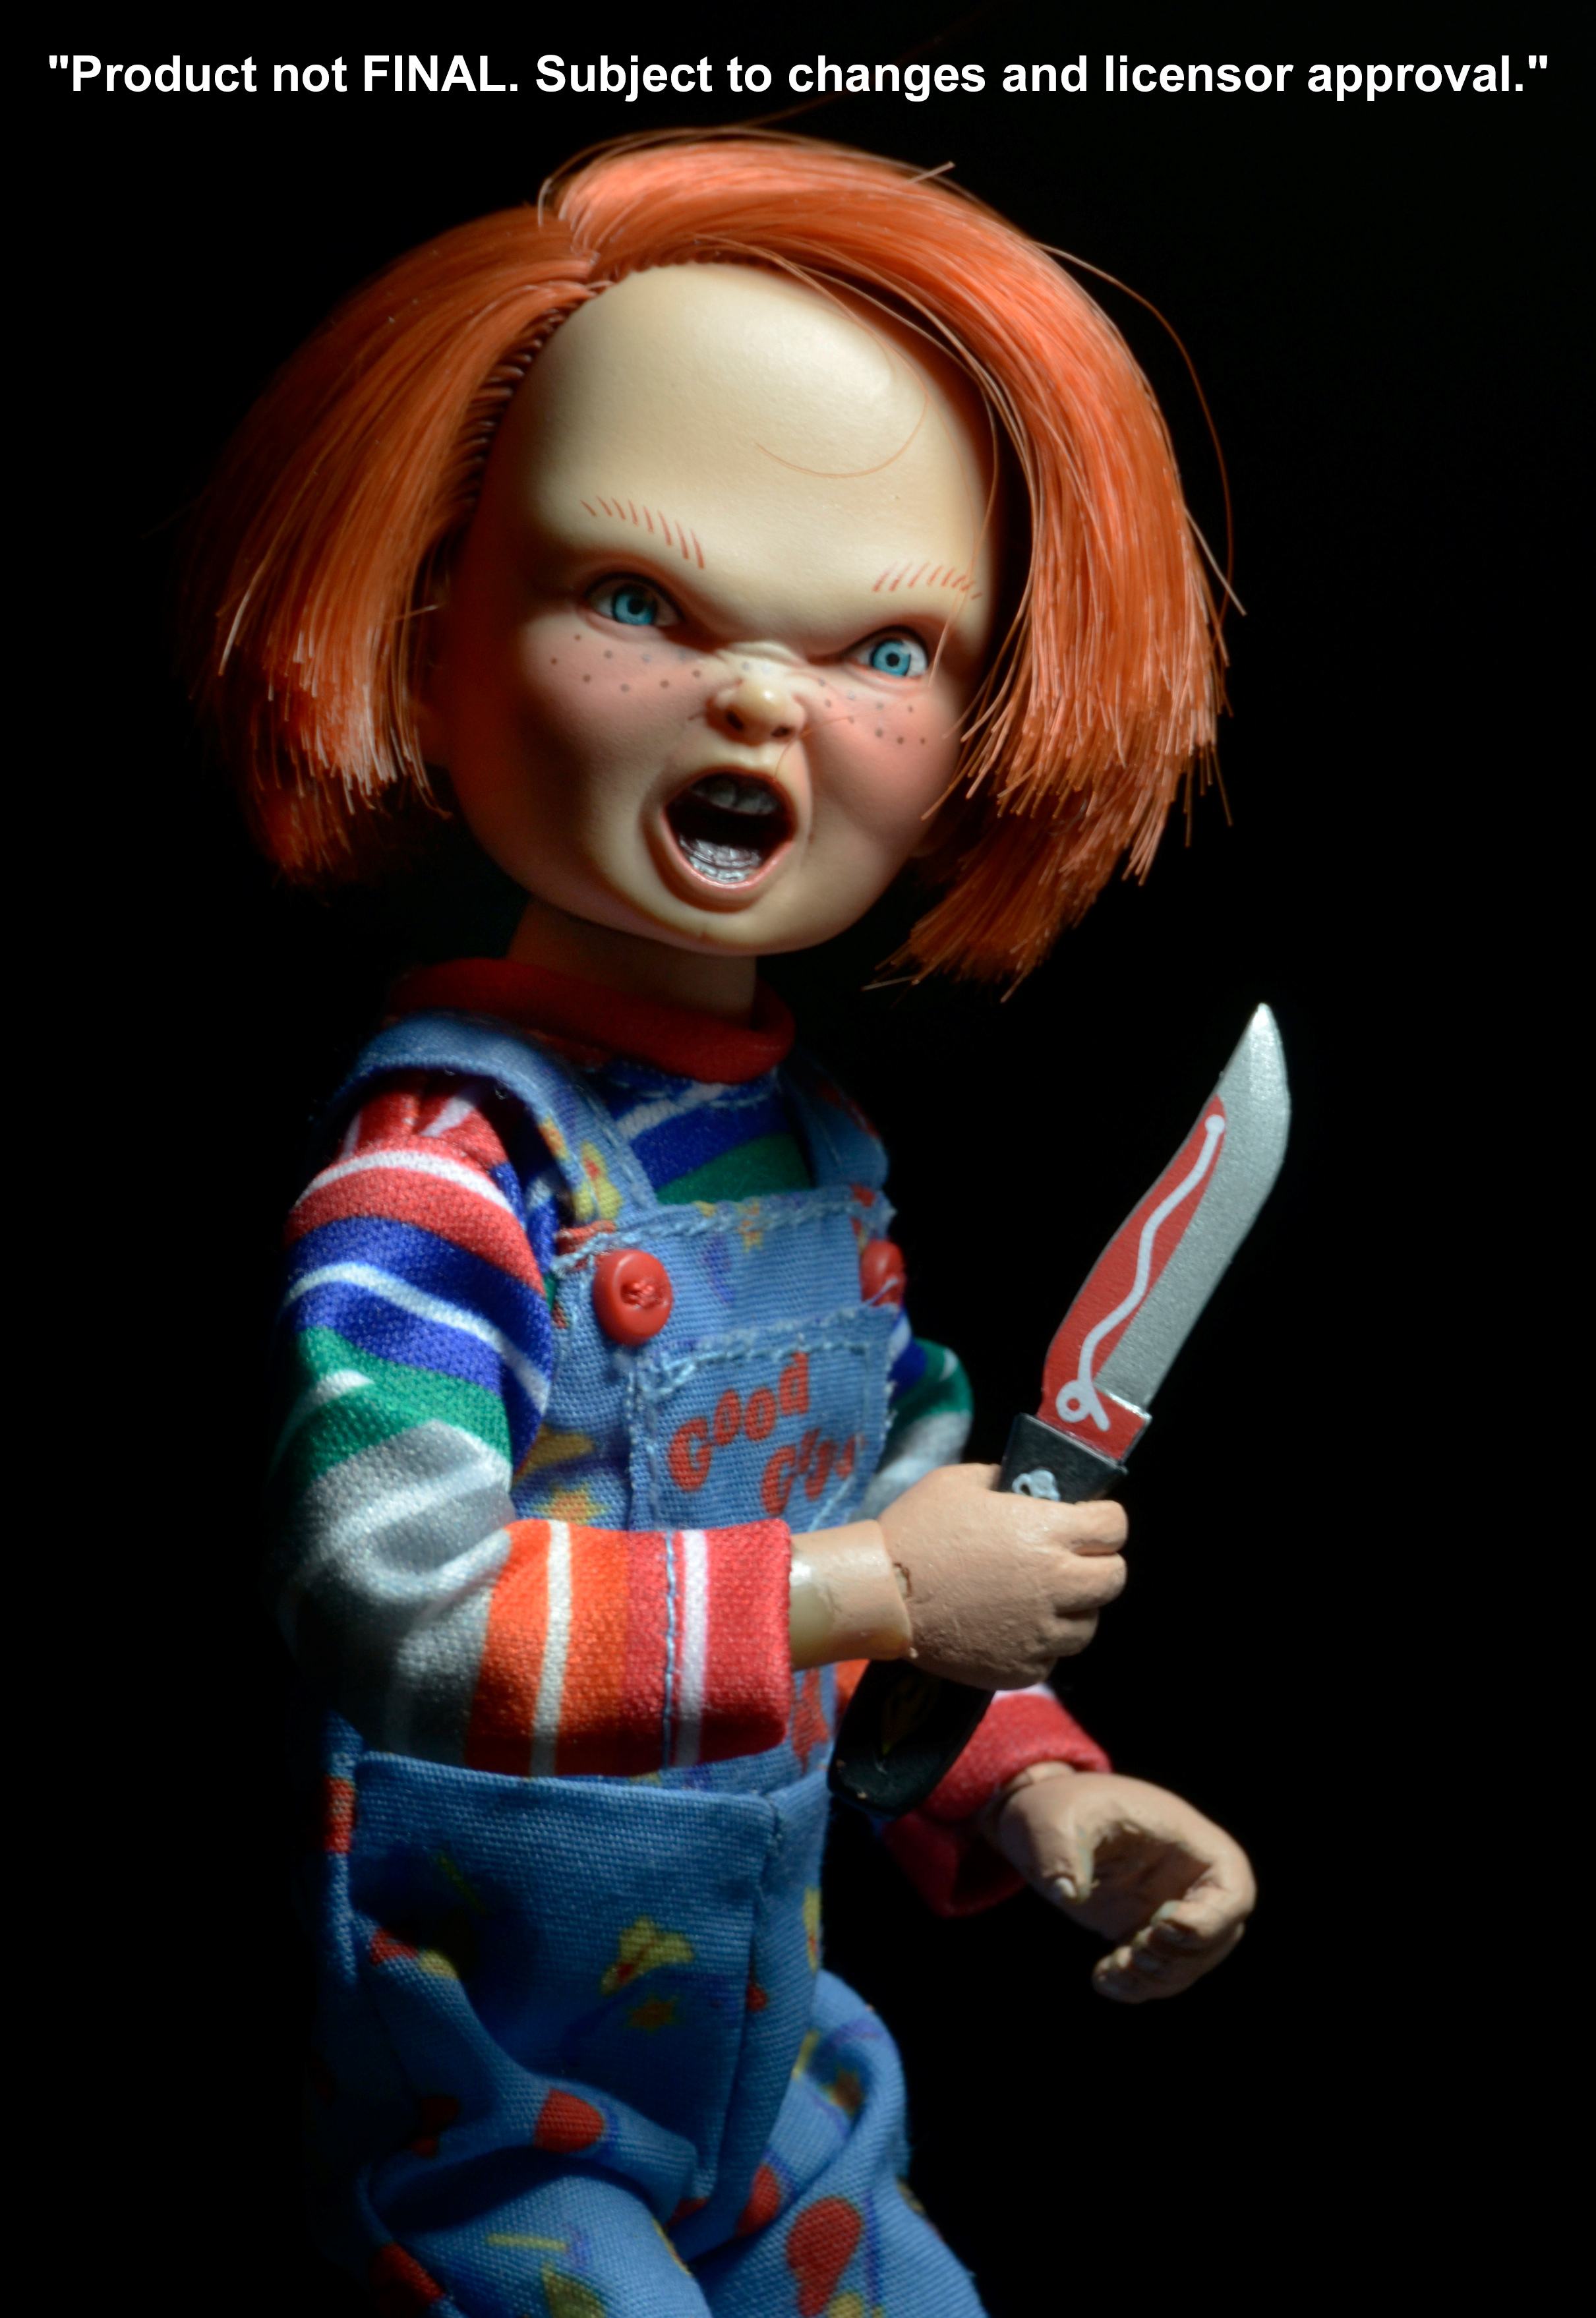 Childs-Play-Chucky-8-Inch-Cloth-Retro-Action-Figure-05